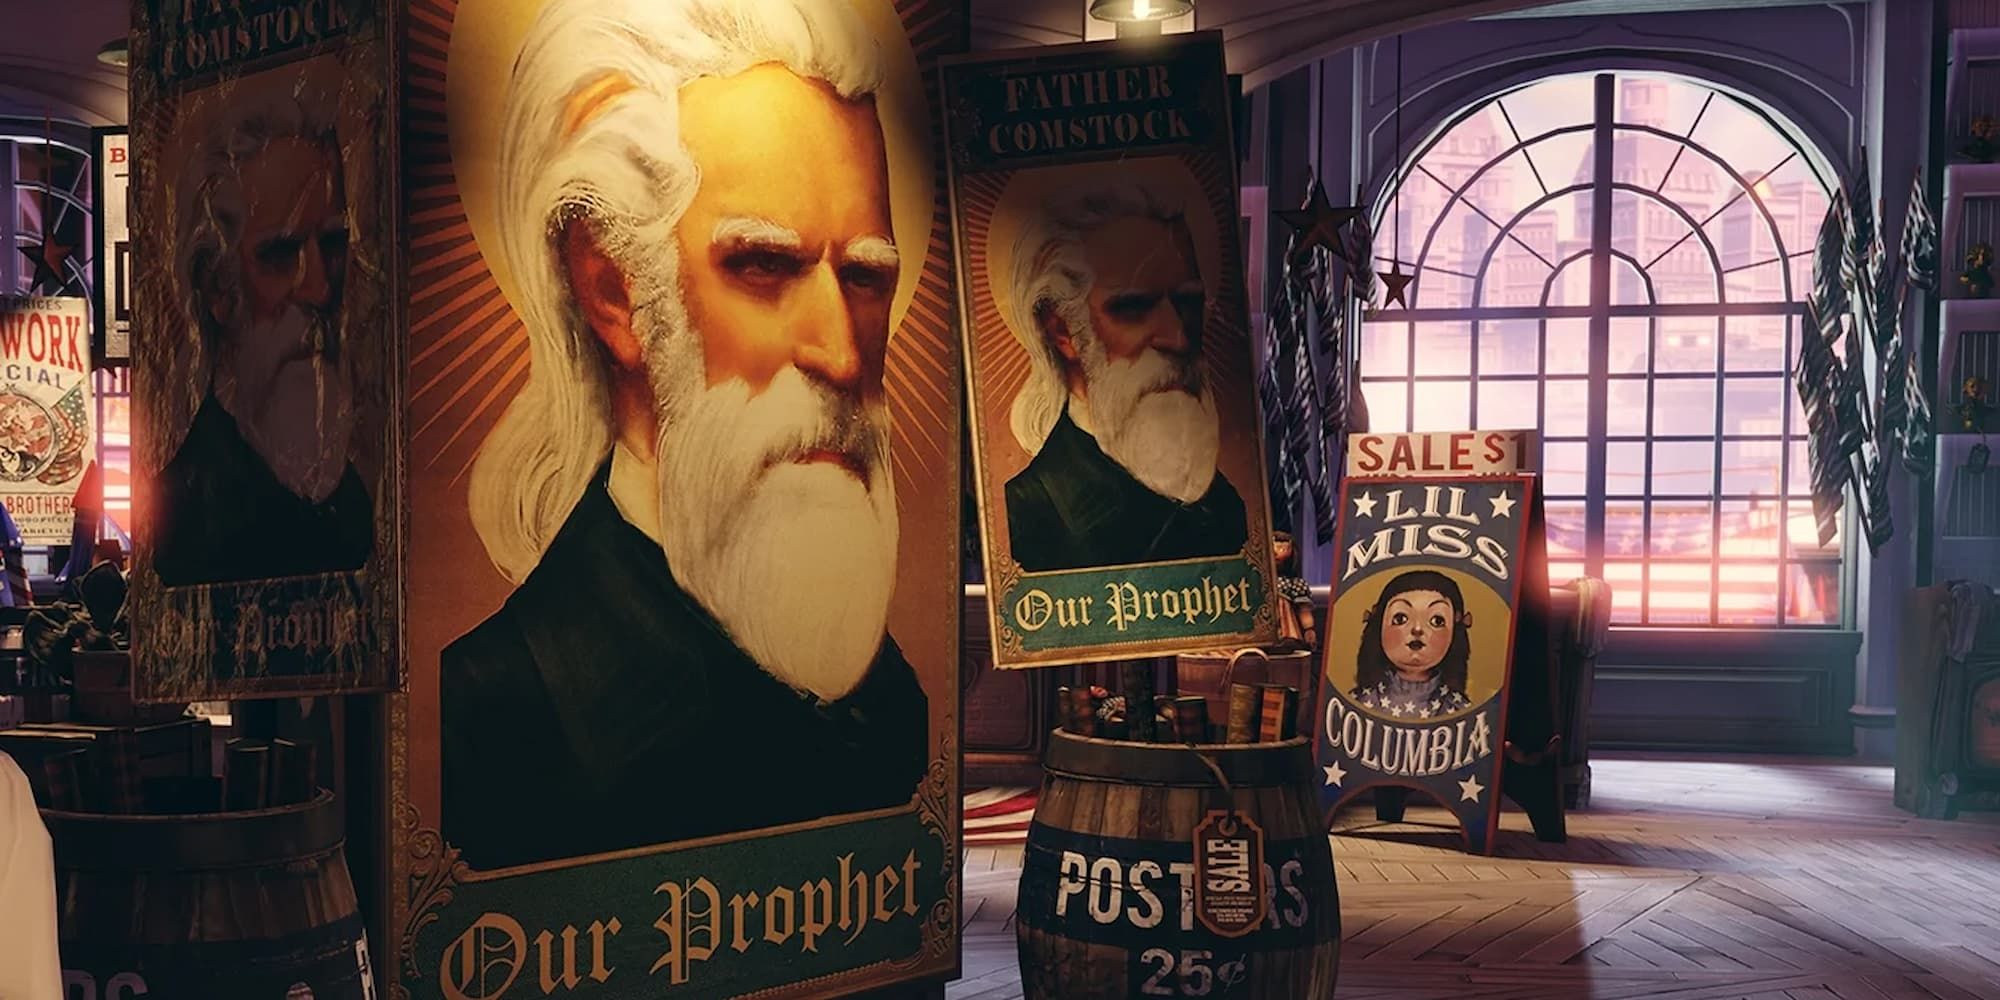 Posters of Father Comstock label him as "Our Prophet."